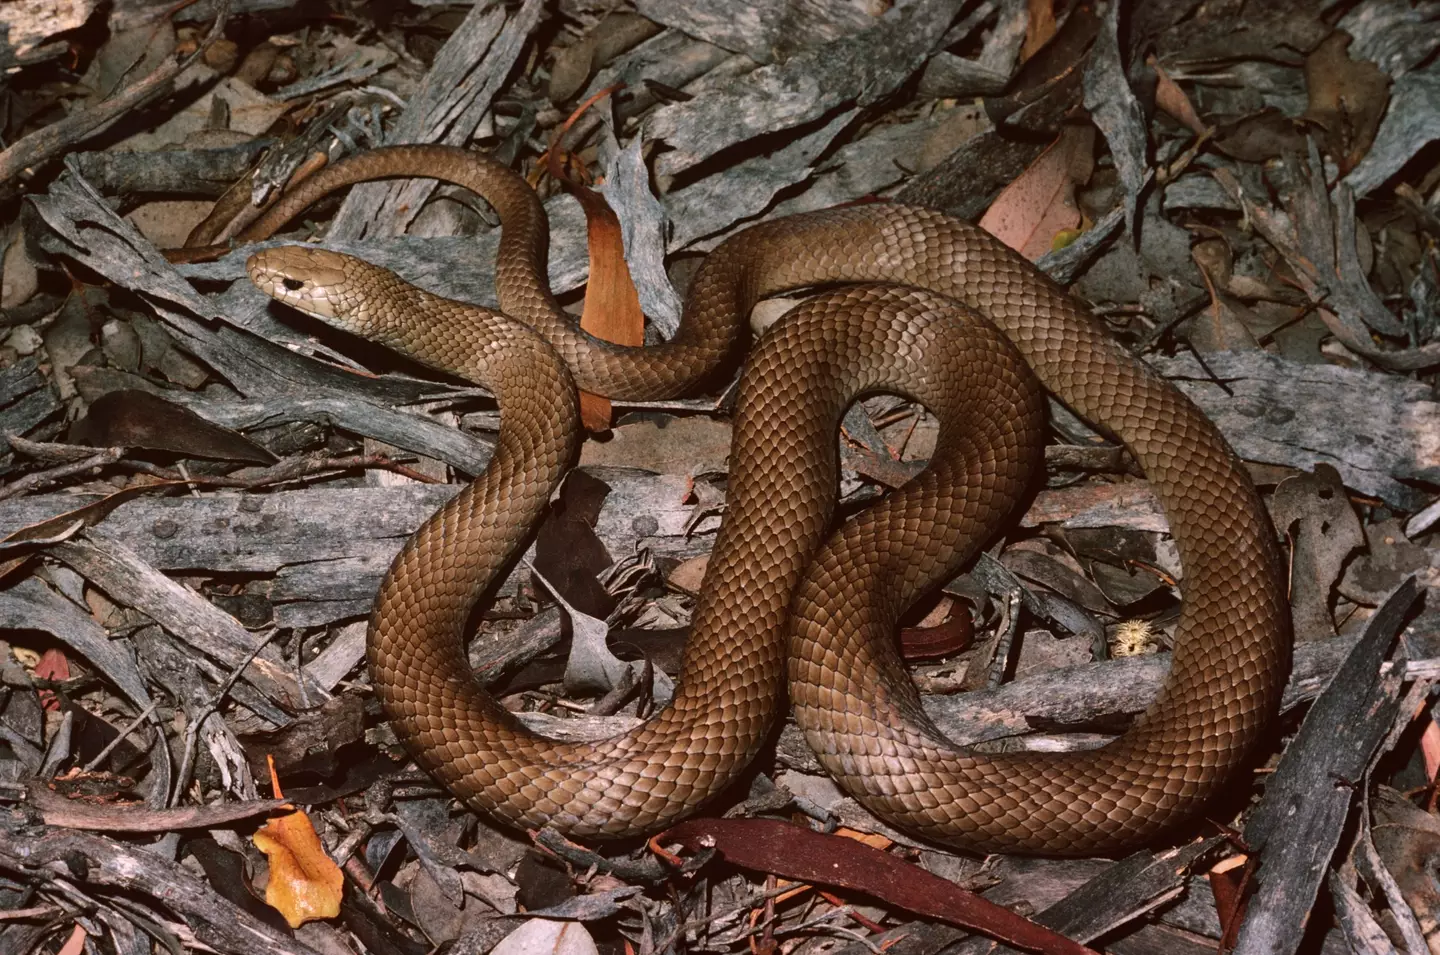 The Eastern Brown Snake.